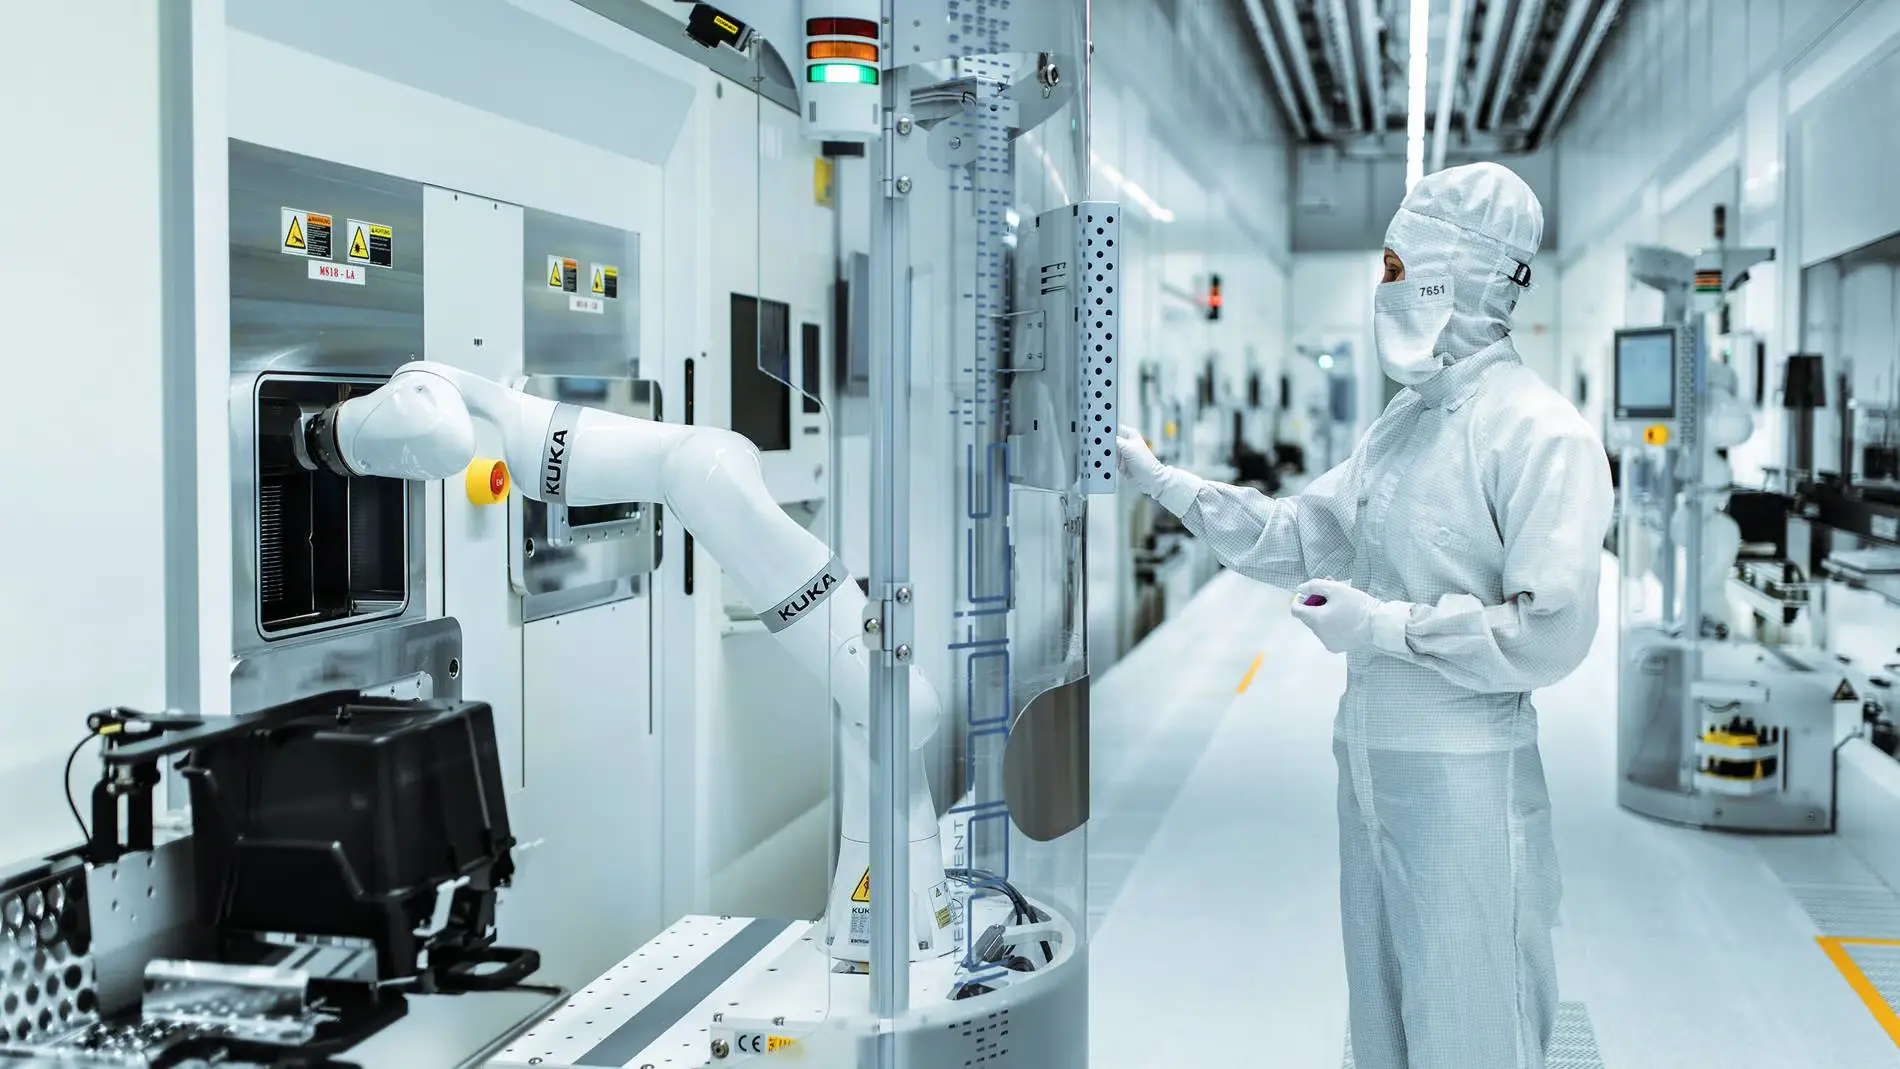 U.S. Invests Billions in Semiconductor Industry. (Photo Internet reproduction)